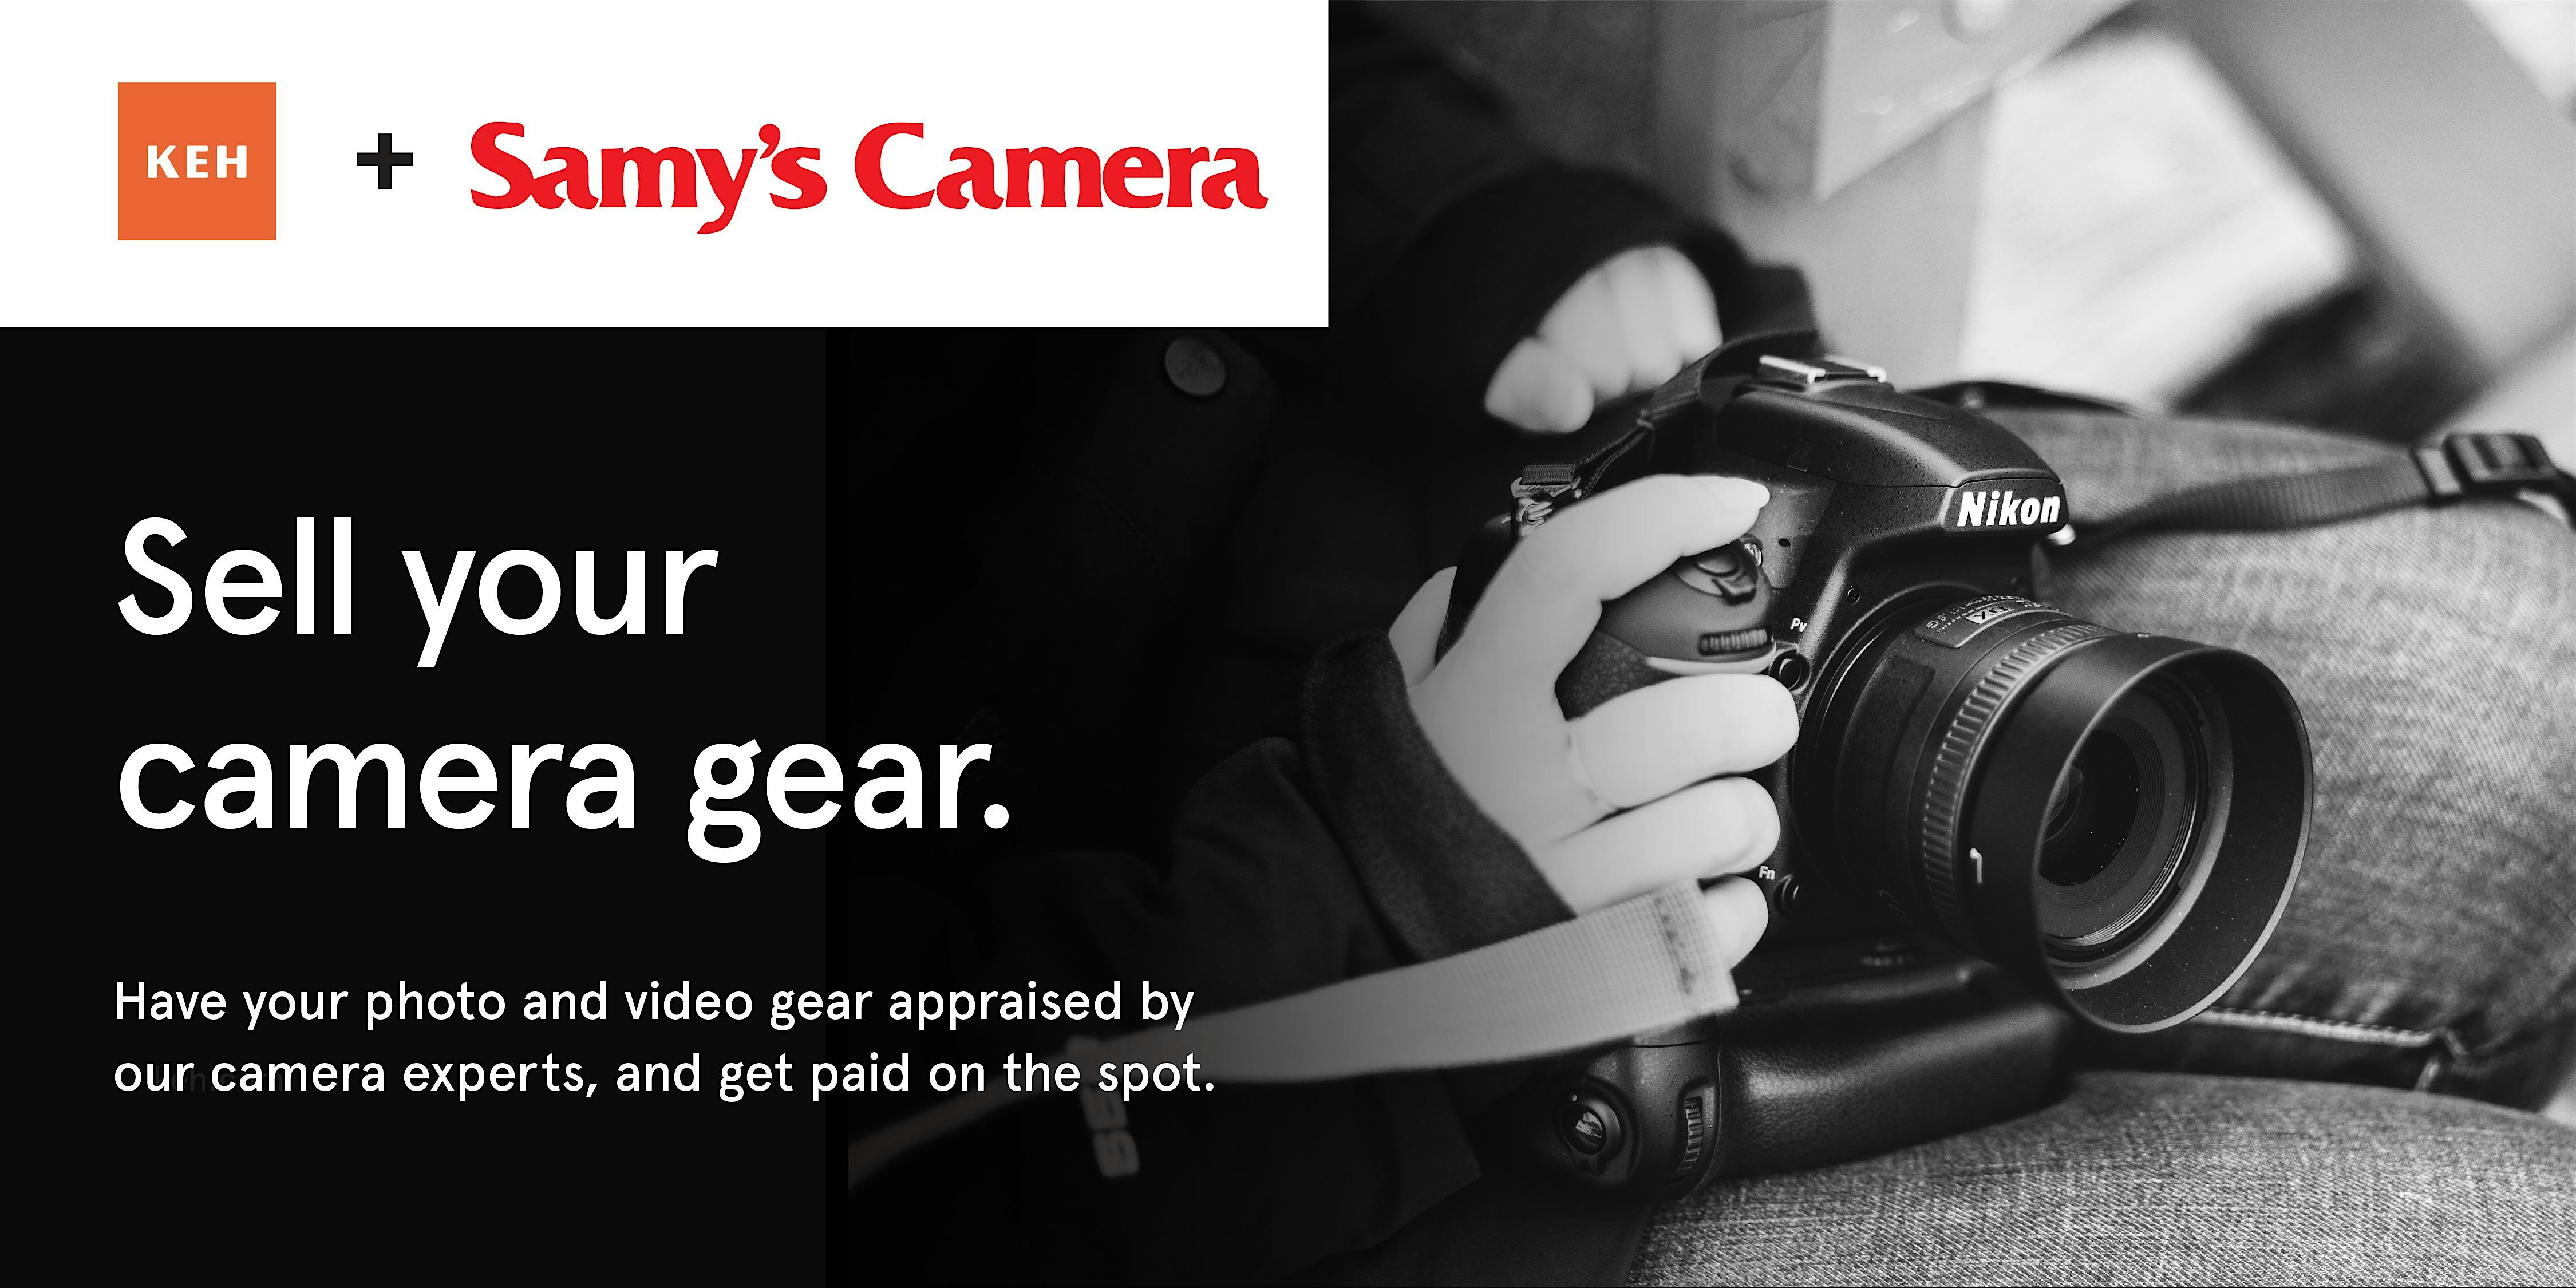 Sell your camera gear (free event) at Samy's Pasadena